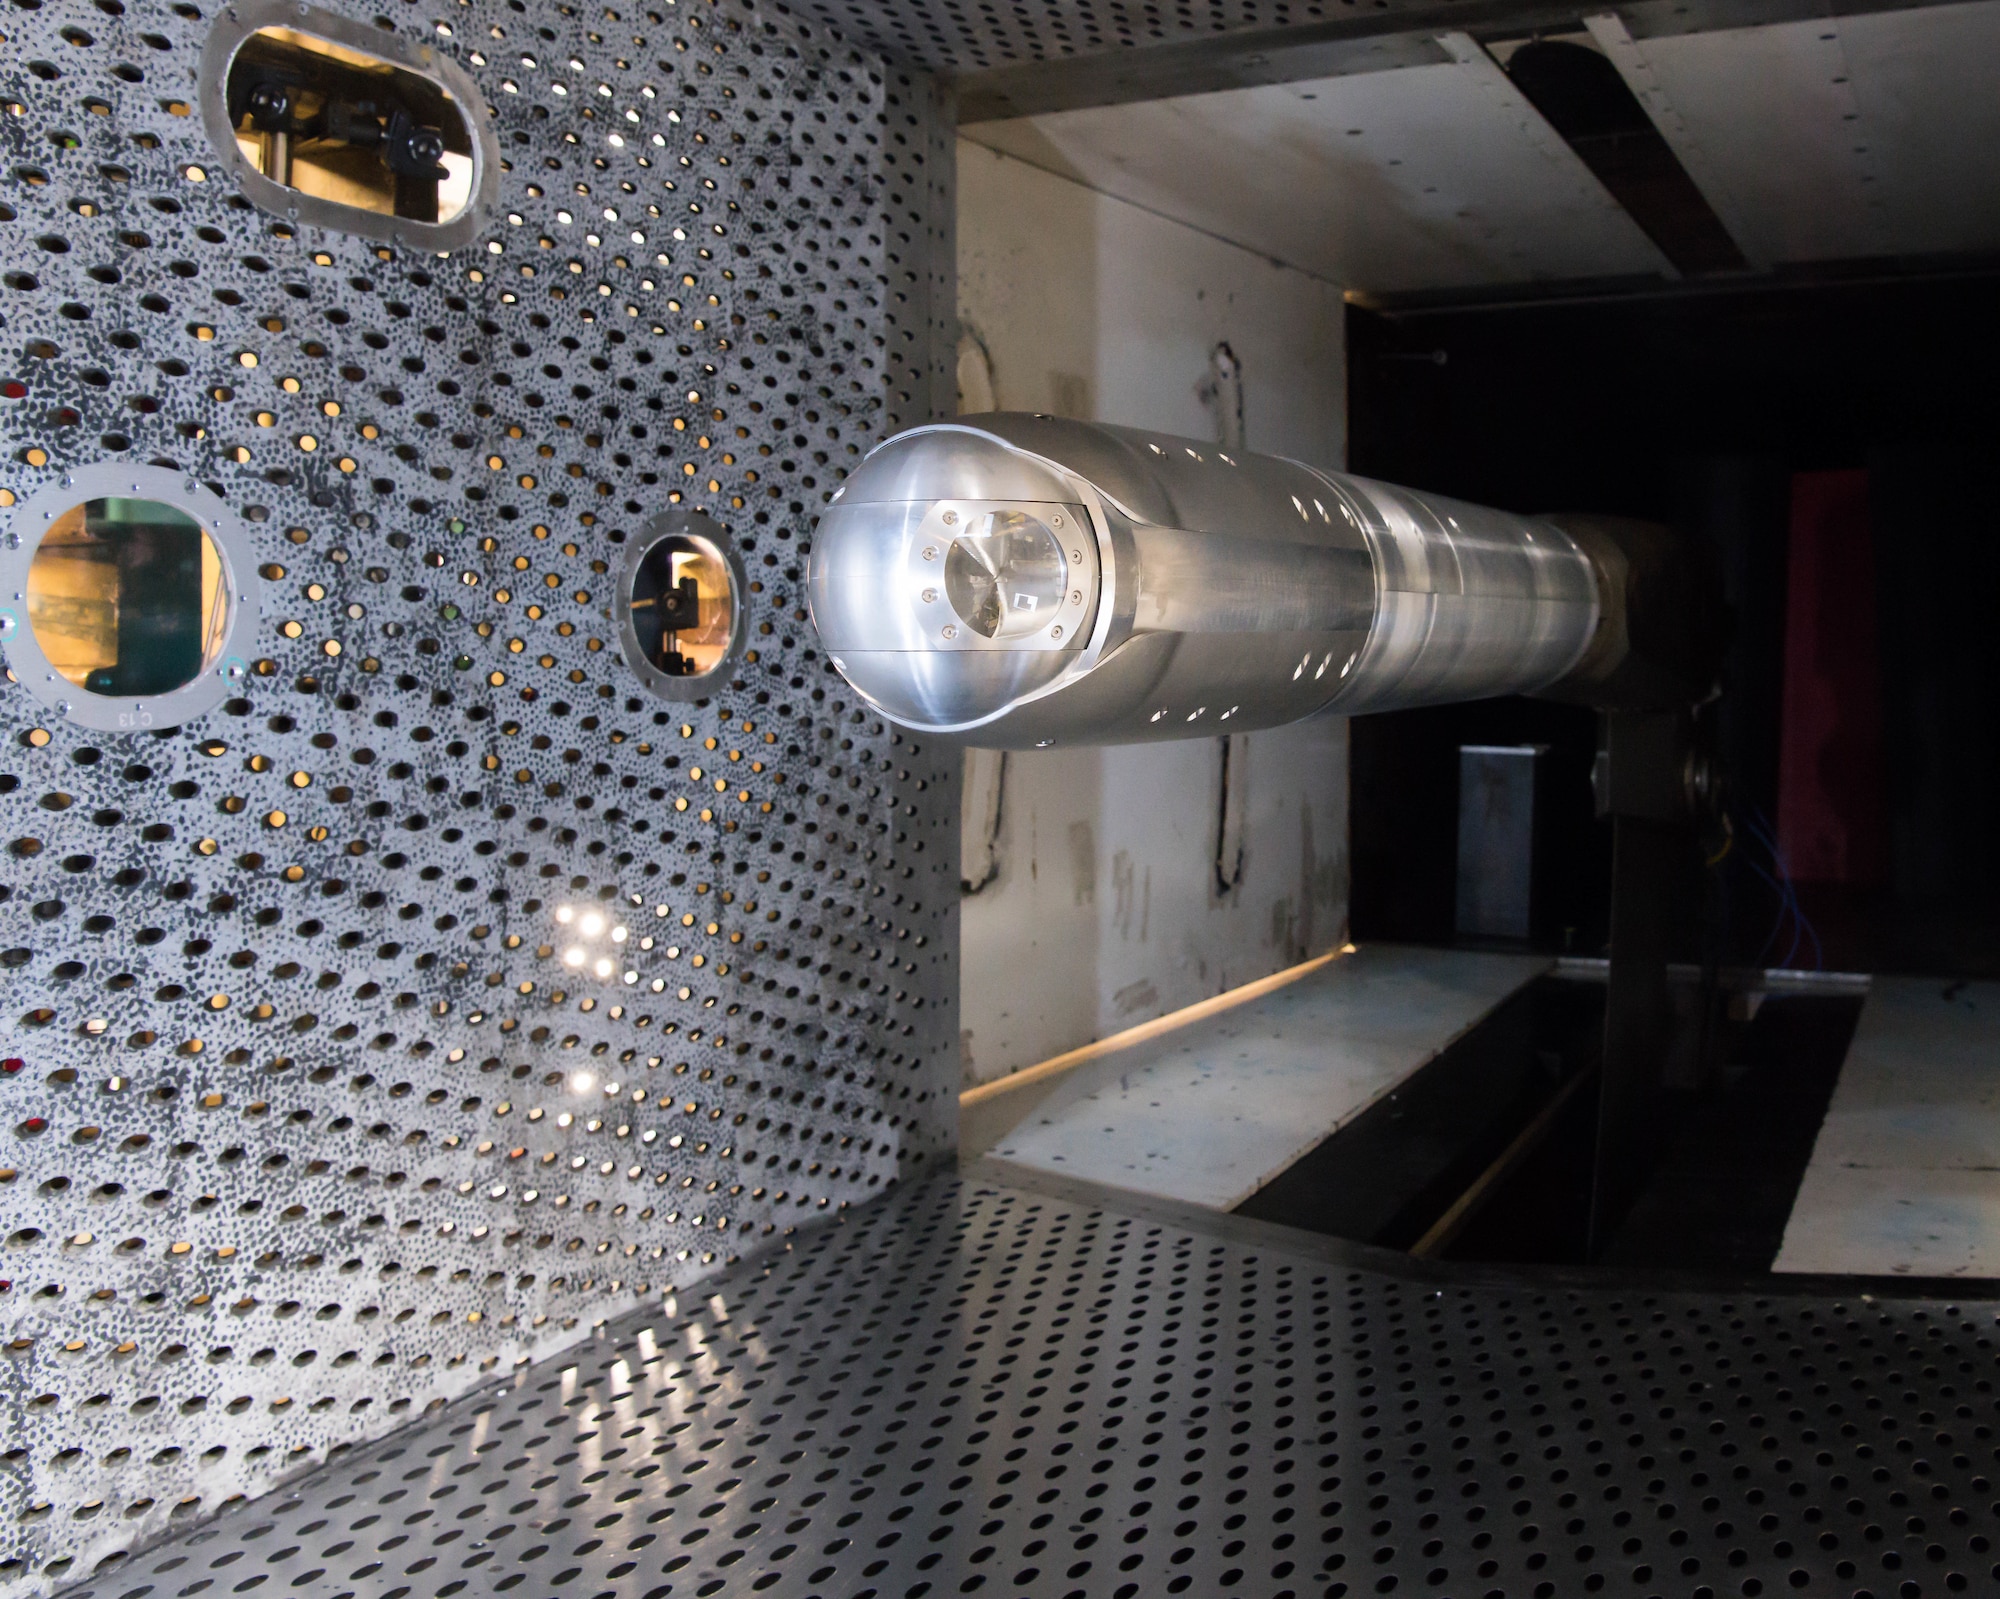 A directed energy (DE) system turret is positioned on a sting in the 4-foot transonic wind tunnel at Arnold Air Force Base for testing by the Aerodynamics Test Branch of Arnold Engineering Development Complex, March 5, 2021. Wind tunnel testing allows system developers to see the impact of airflow disturbances on the DE beam. (U.S. Air Force photo by Jill Pickett)